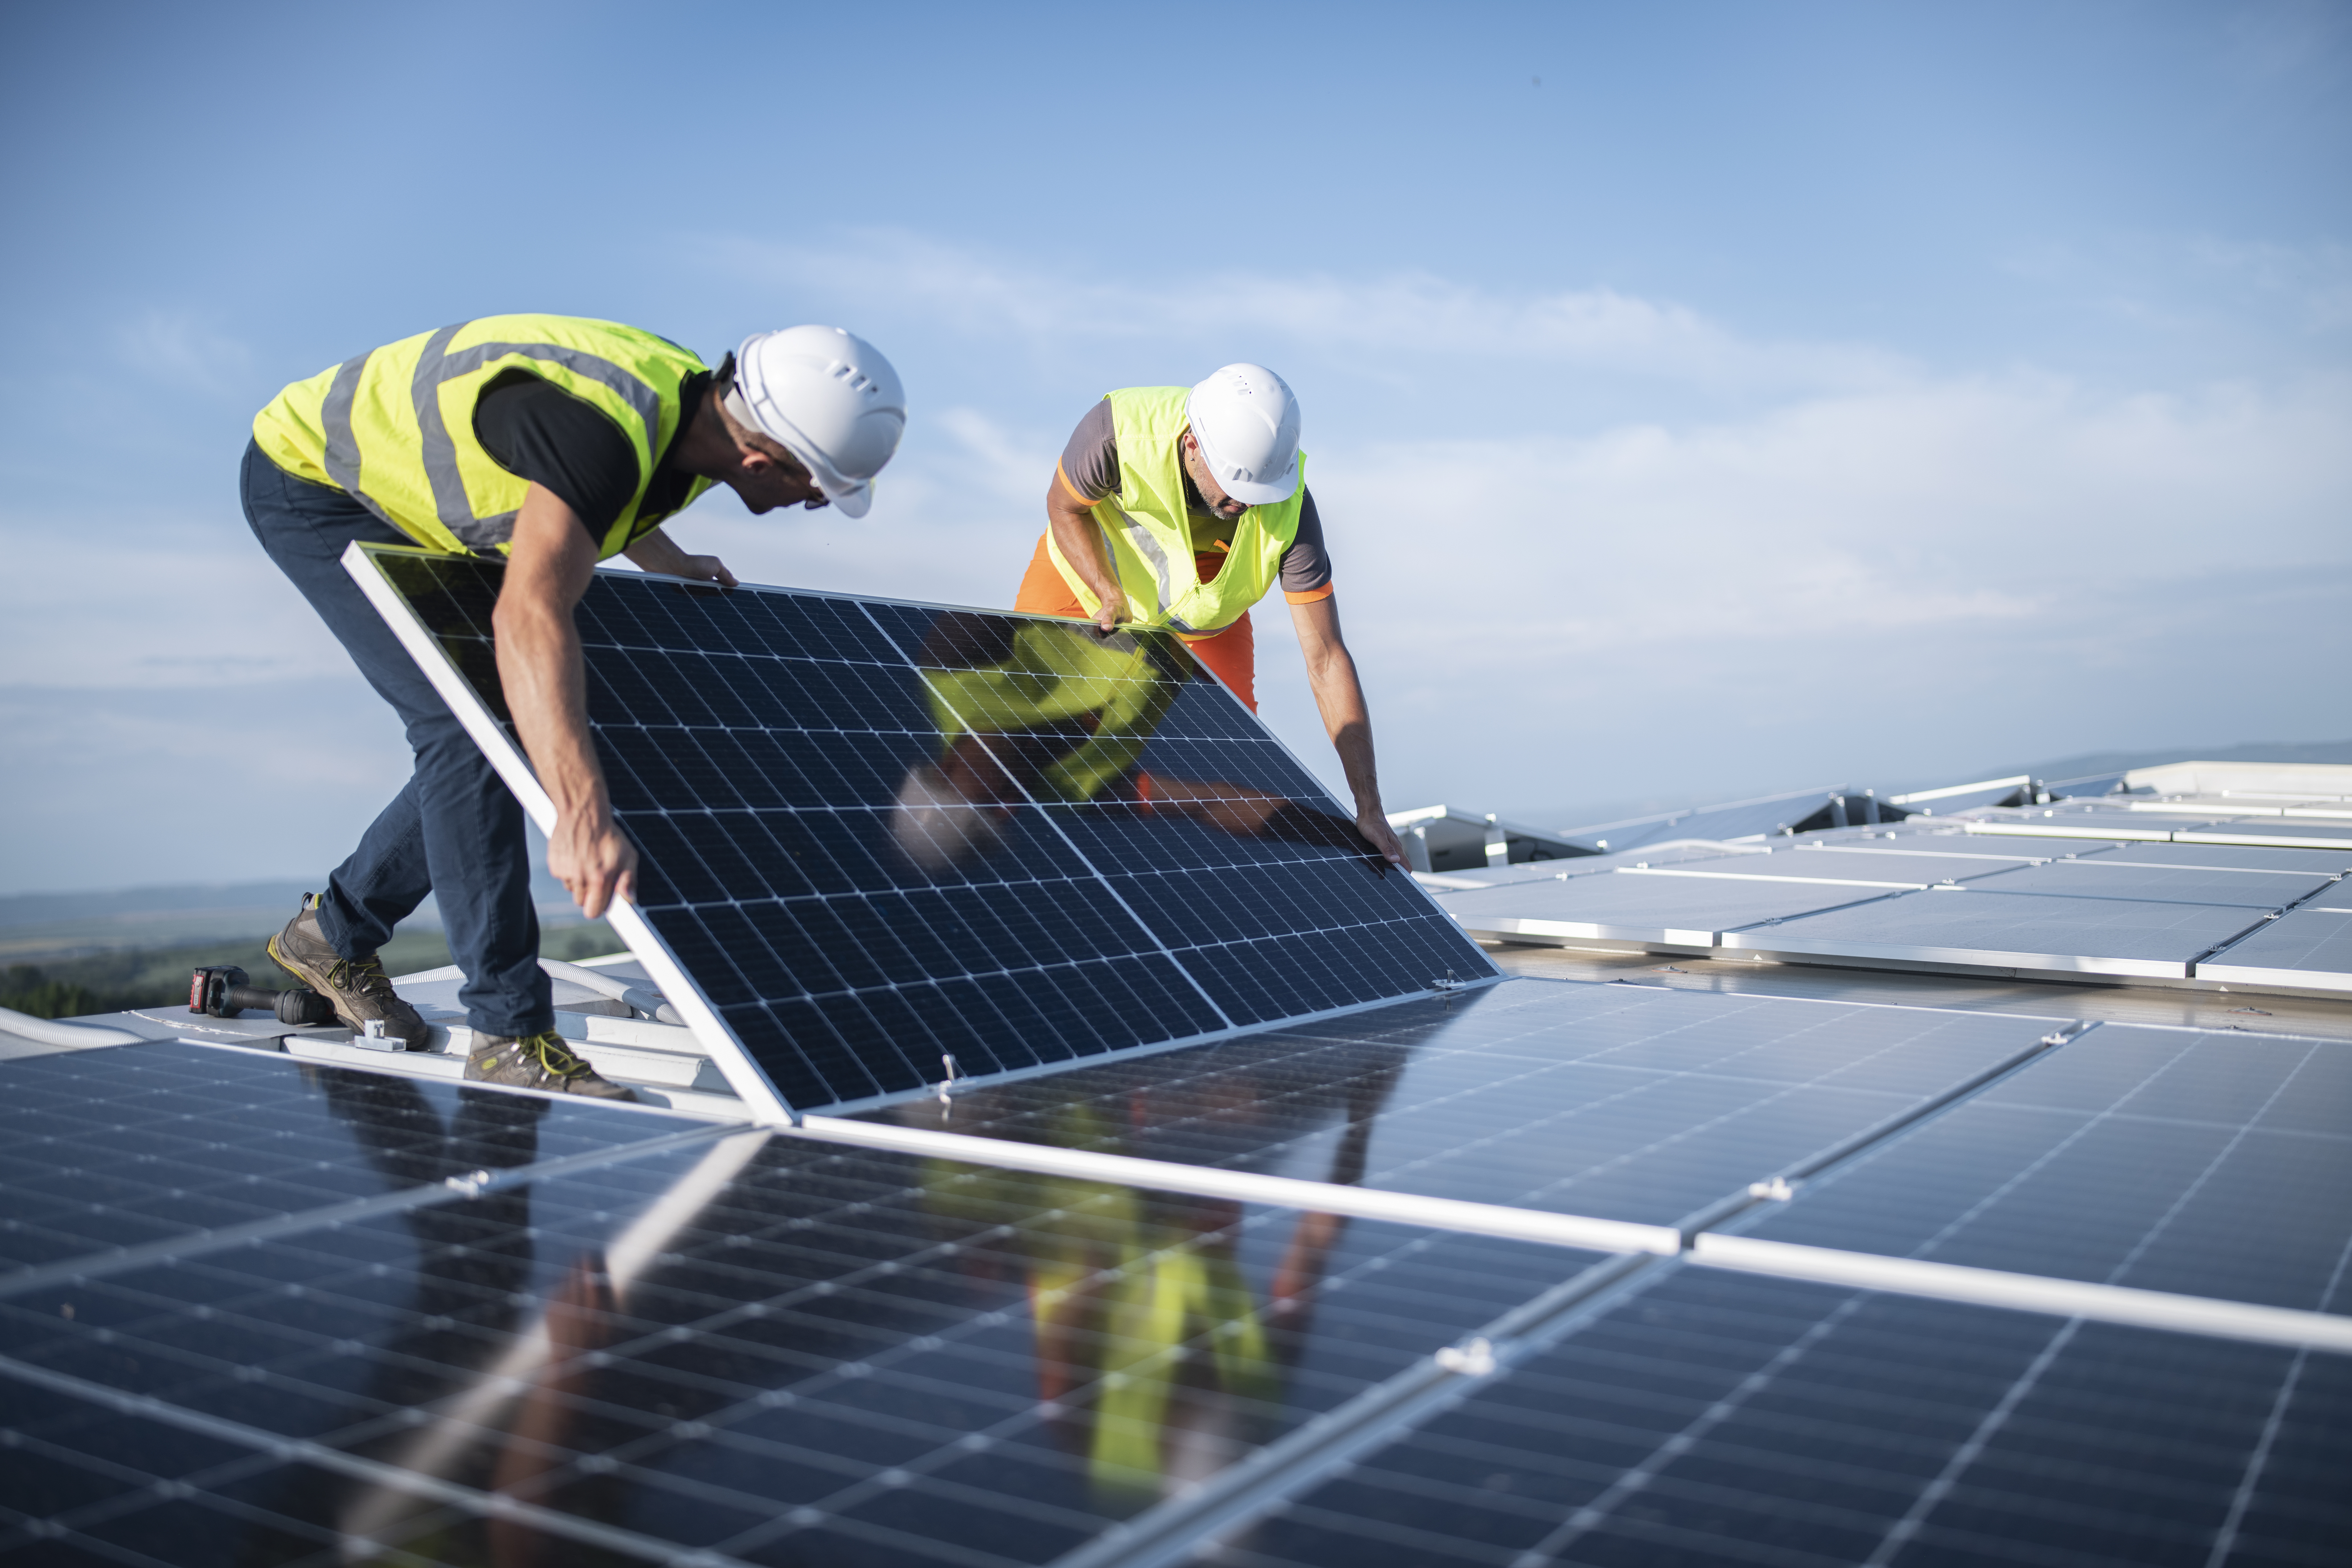 Solar panel installation with workers